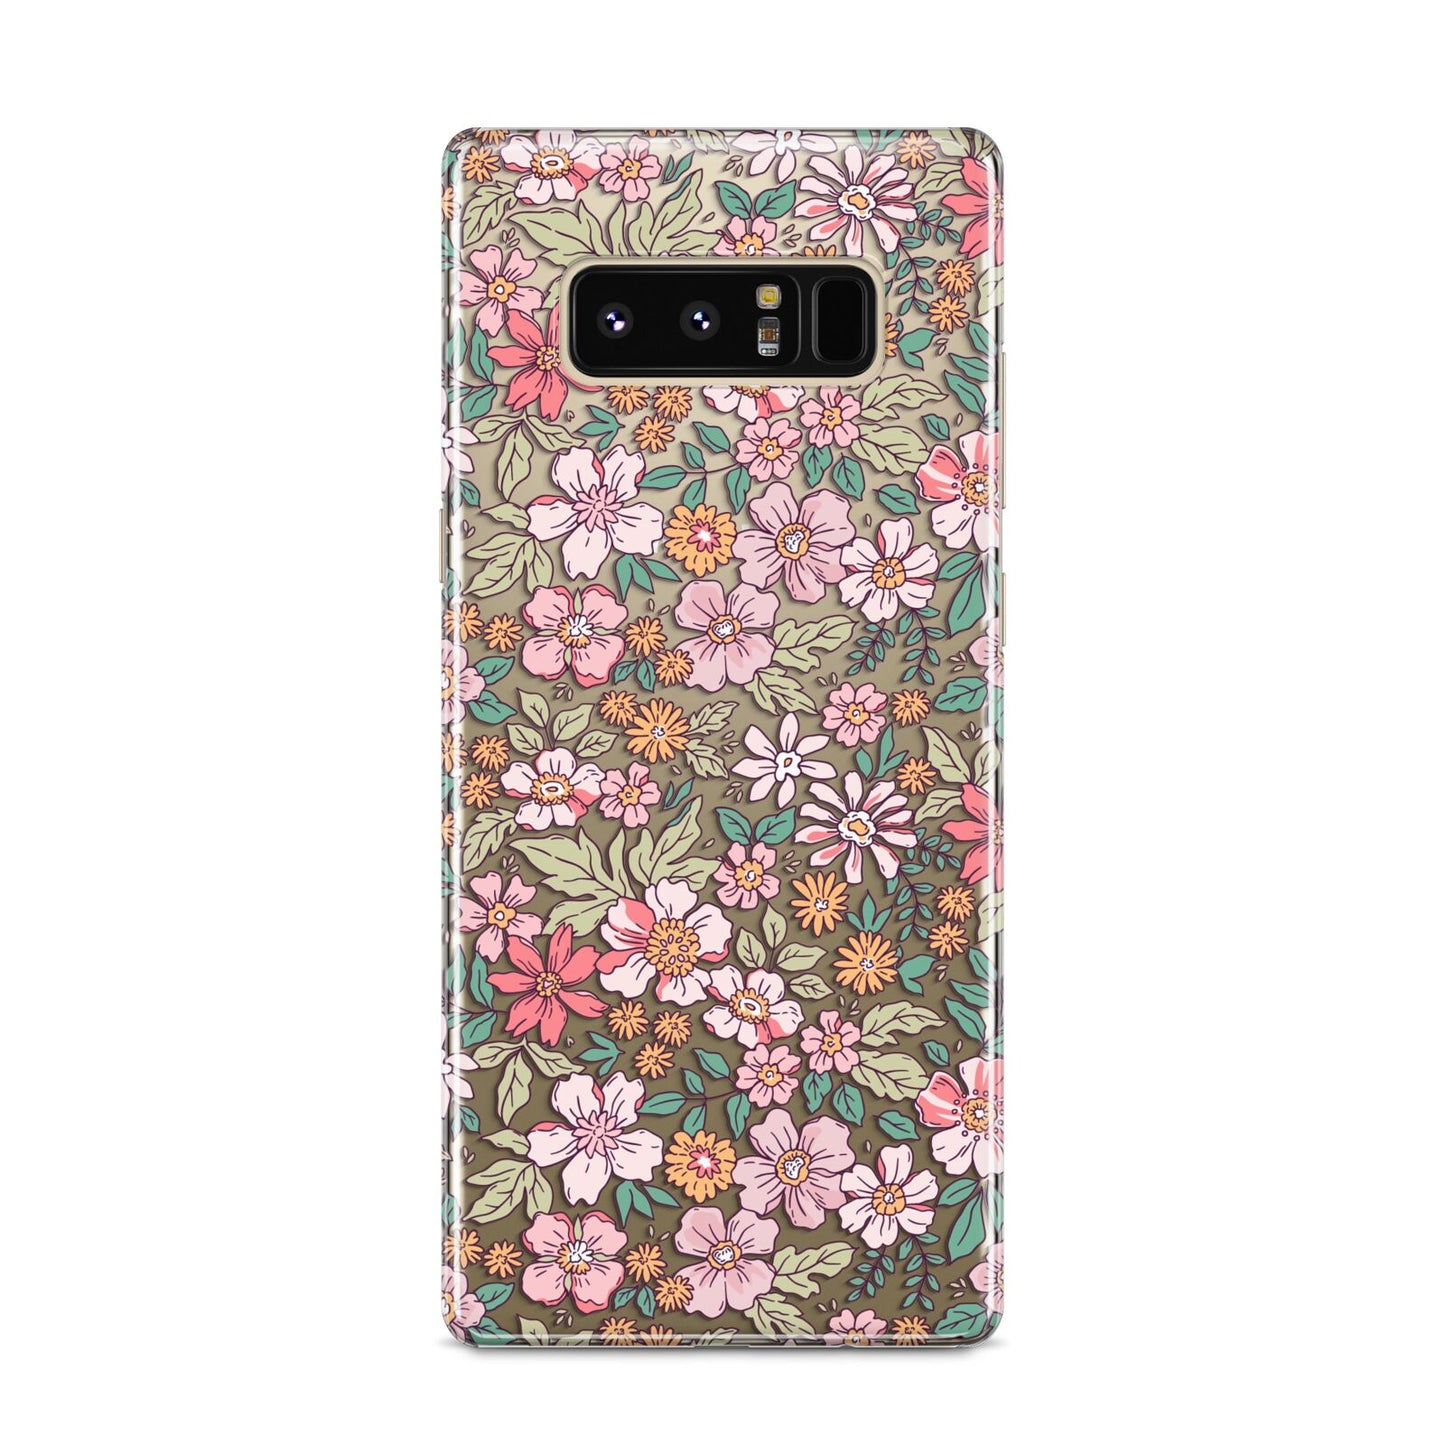 Small Floral Pattern Samsung Galaxy S8 Case